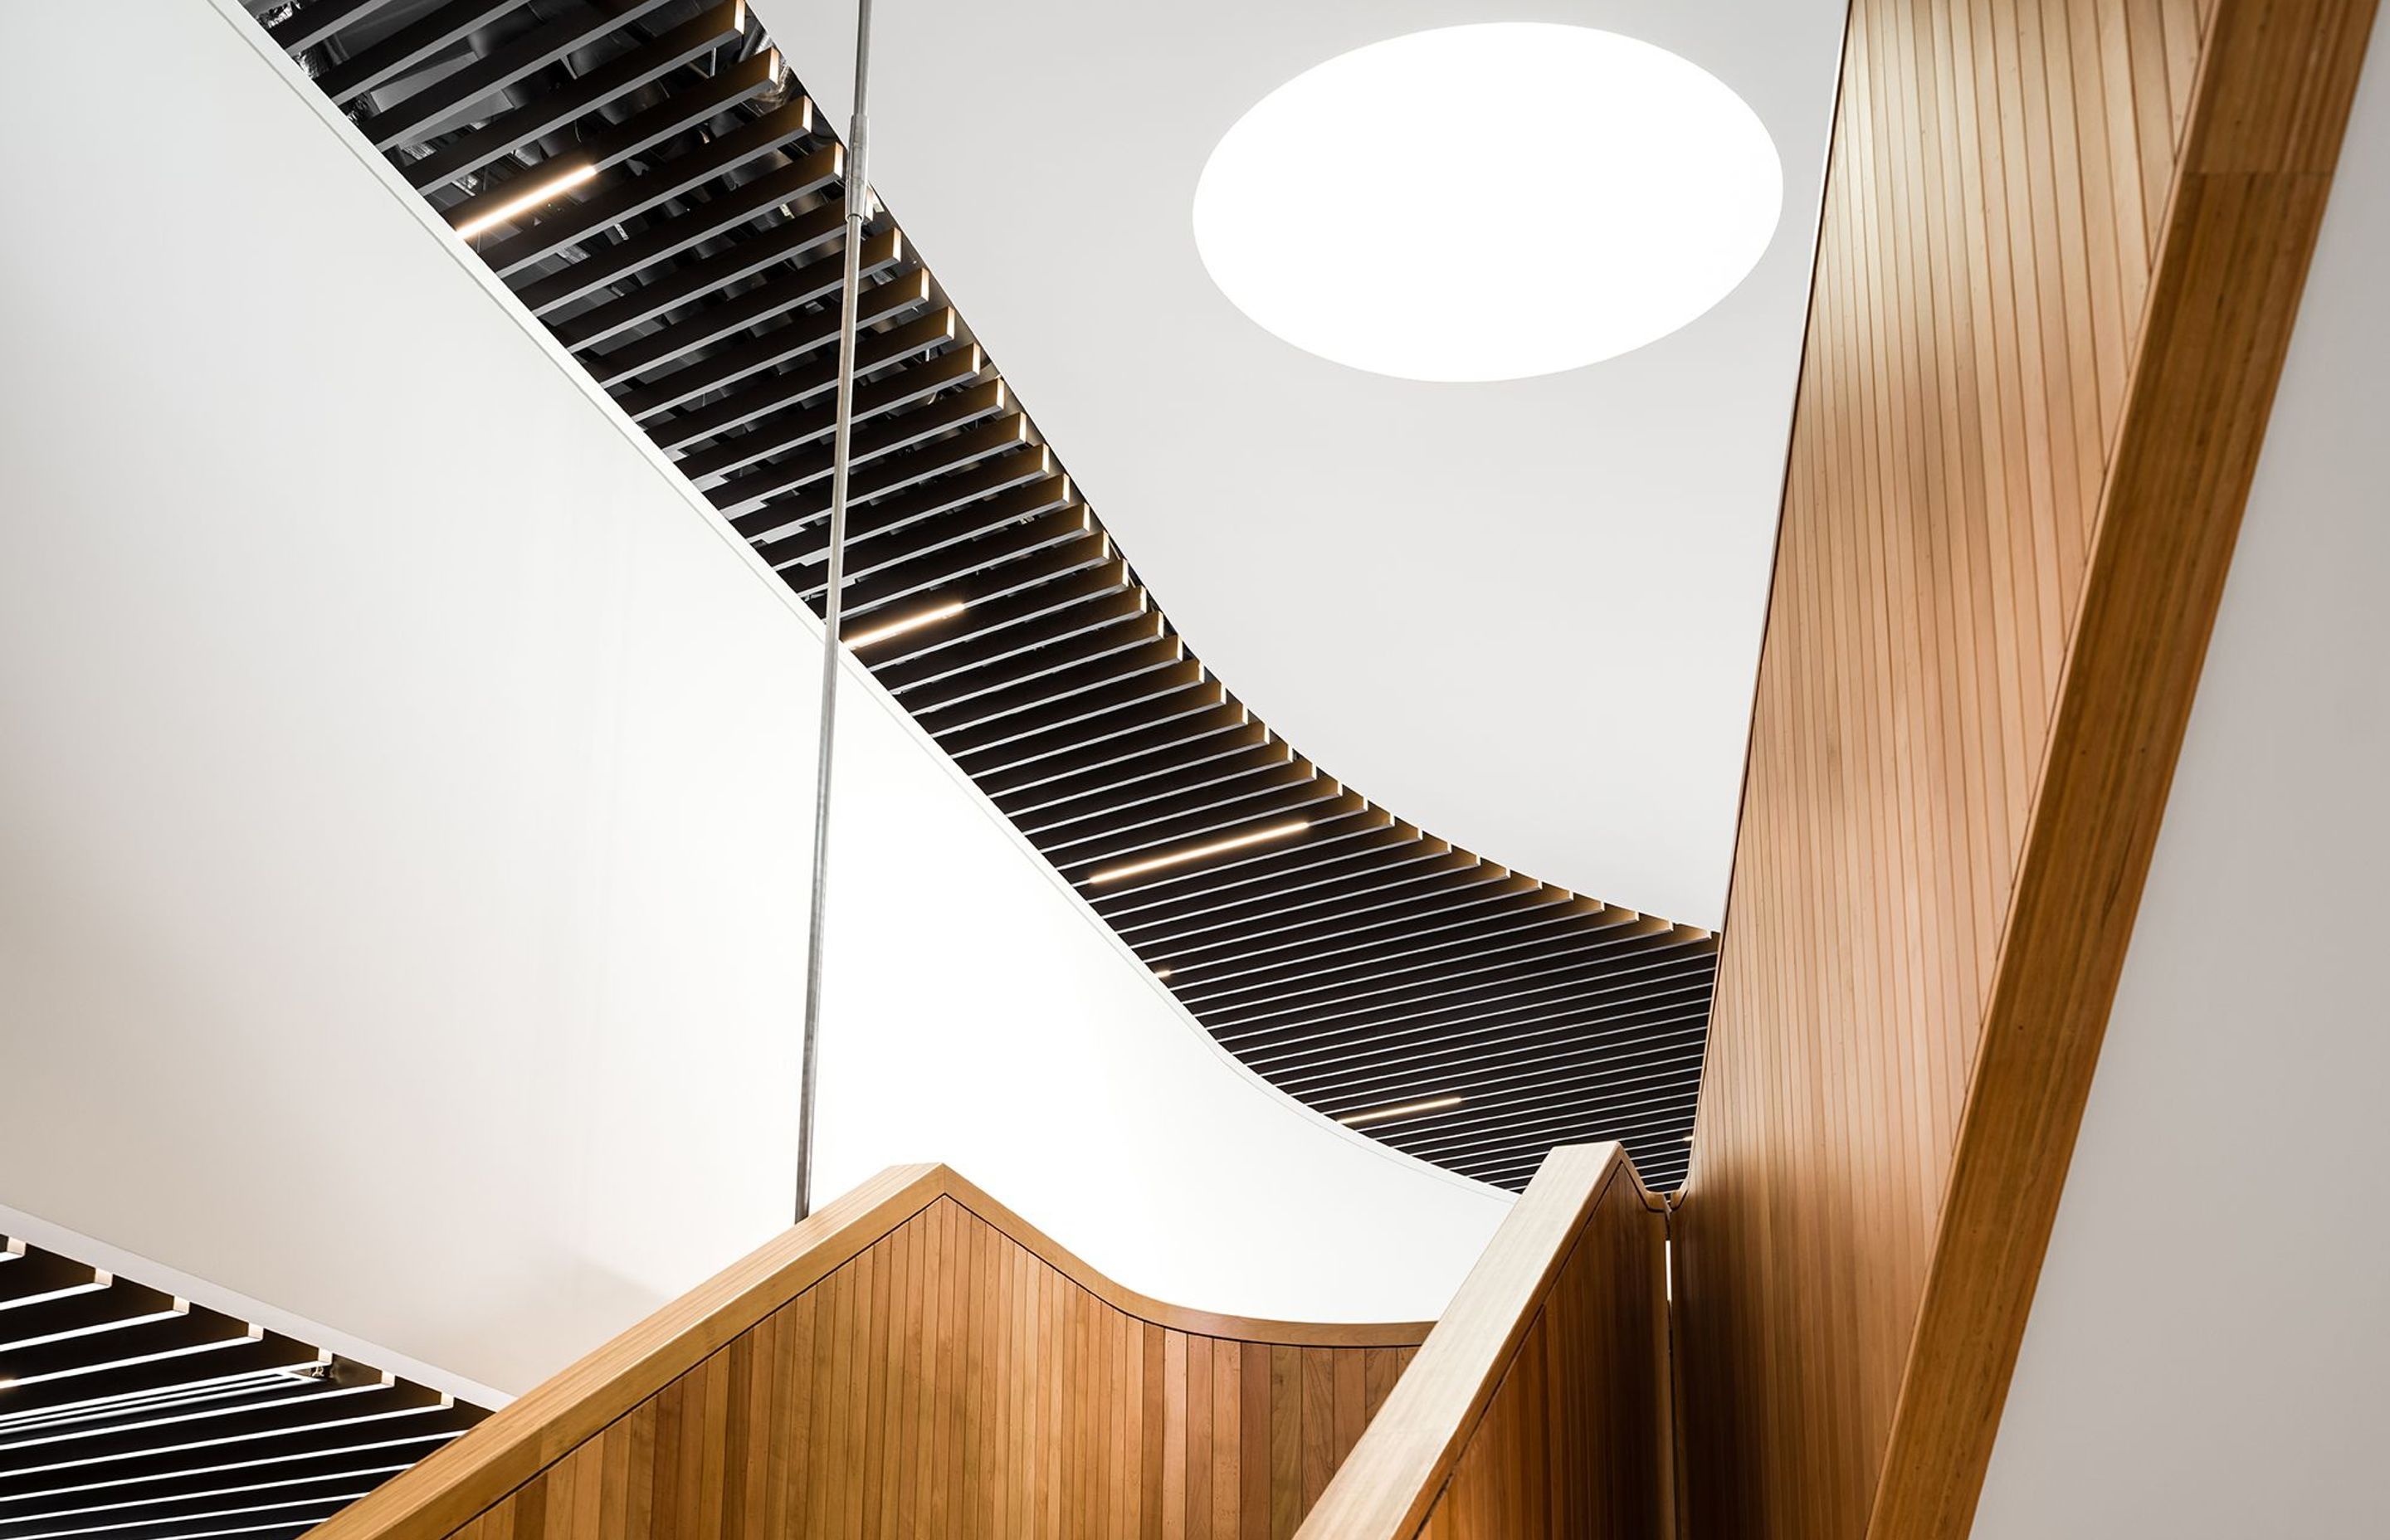 Looking up the timber stairs to the circular lightwell, which draws light down through the five levels.